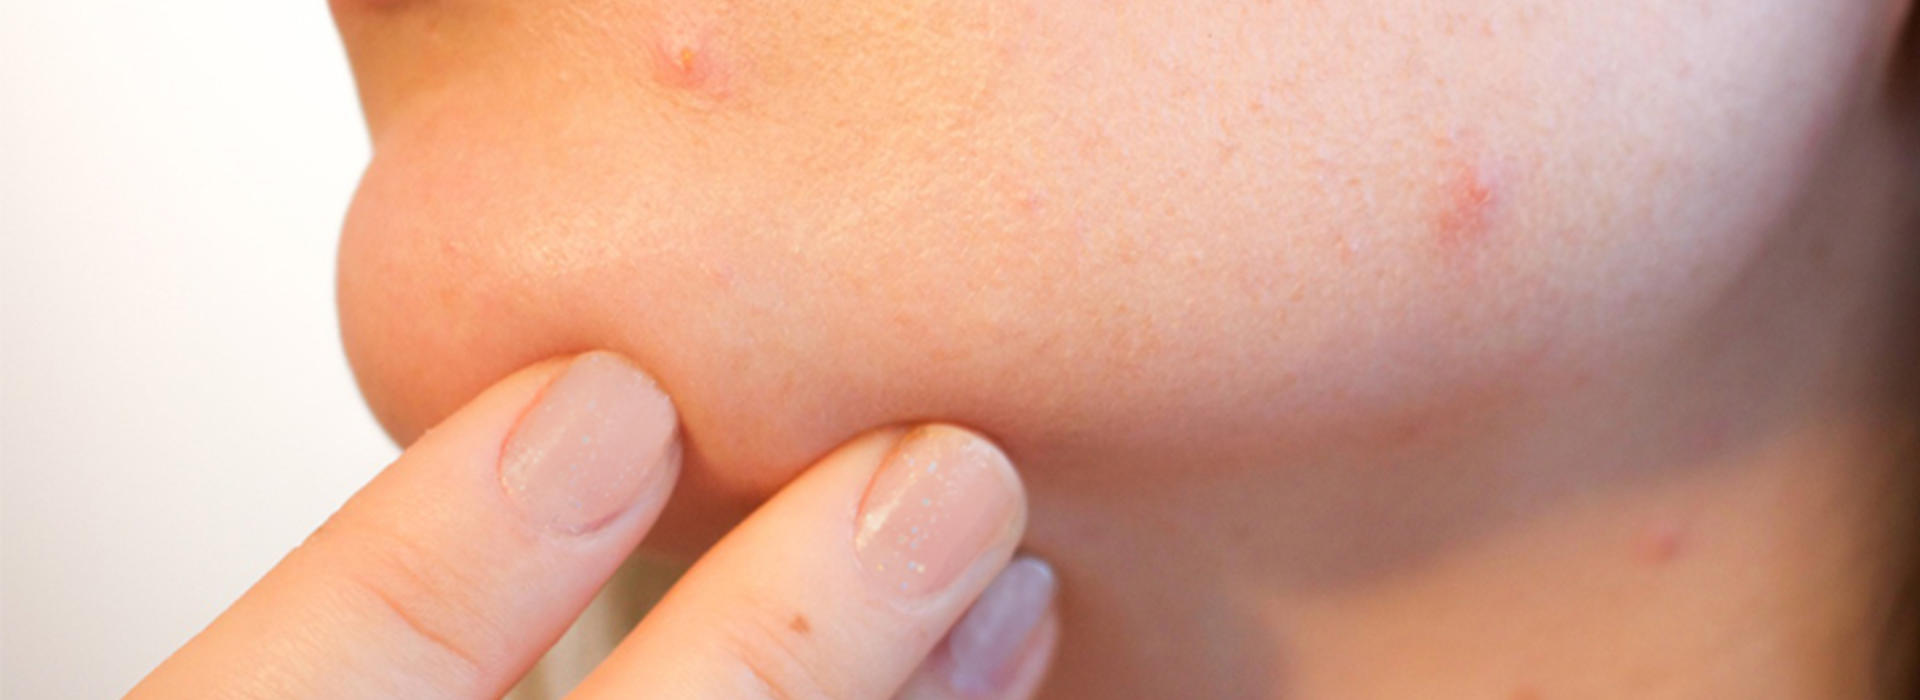 A woman's face spotted with acne.